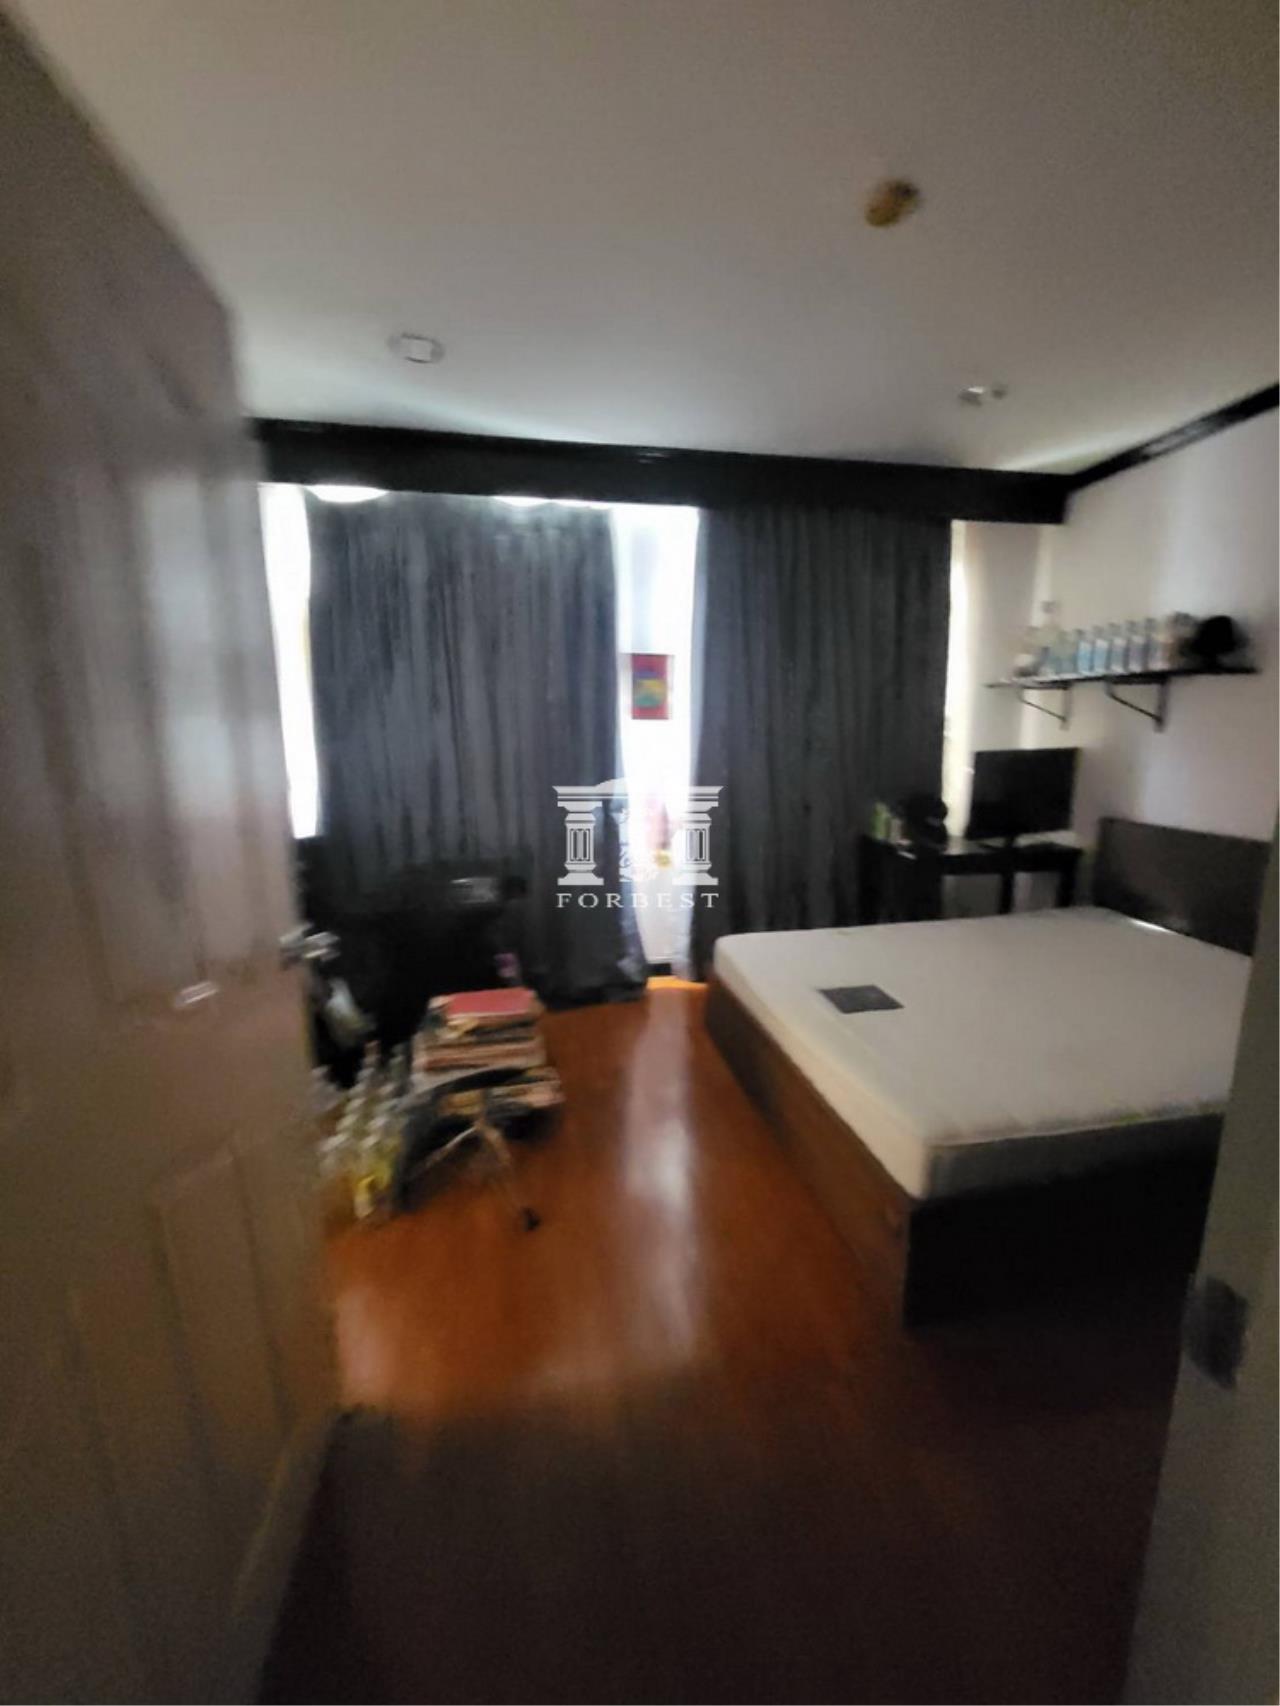 42682 - Baan Klang Krung University near BTS Thonglor and Donki Mall Townhome for sale